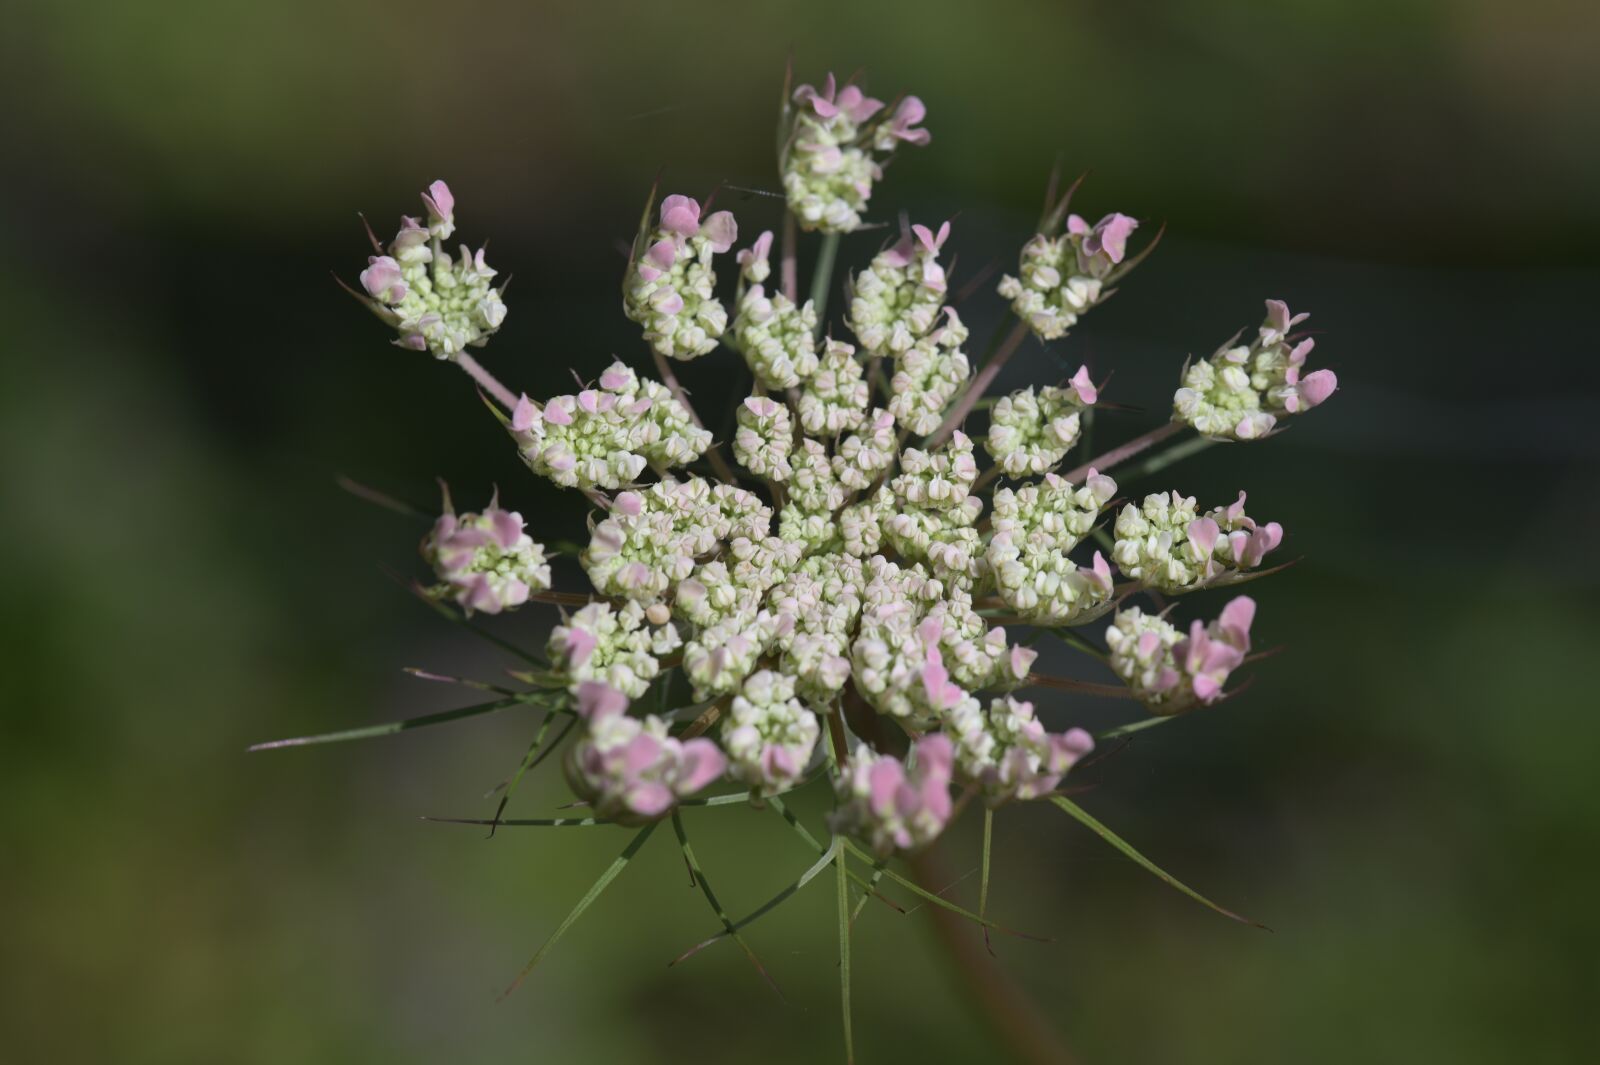 Nikon Z6 sample photo. Queen anne's lace, flowers photography